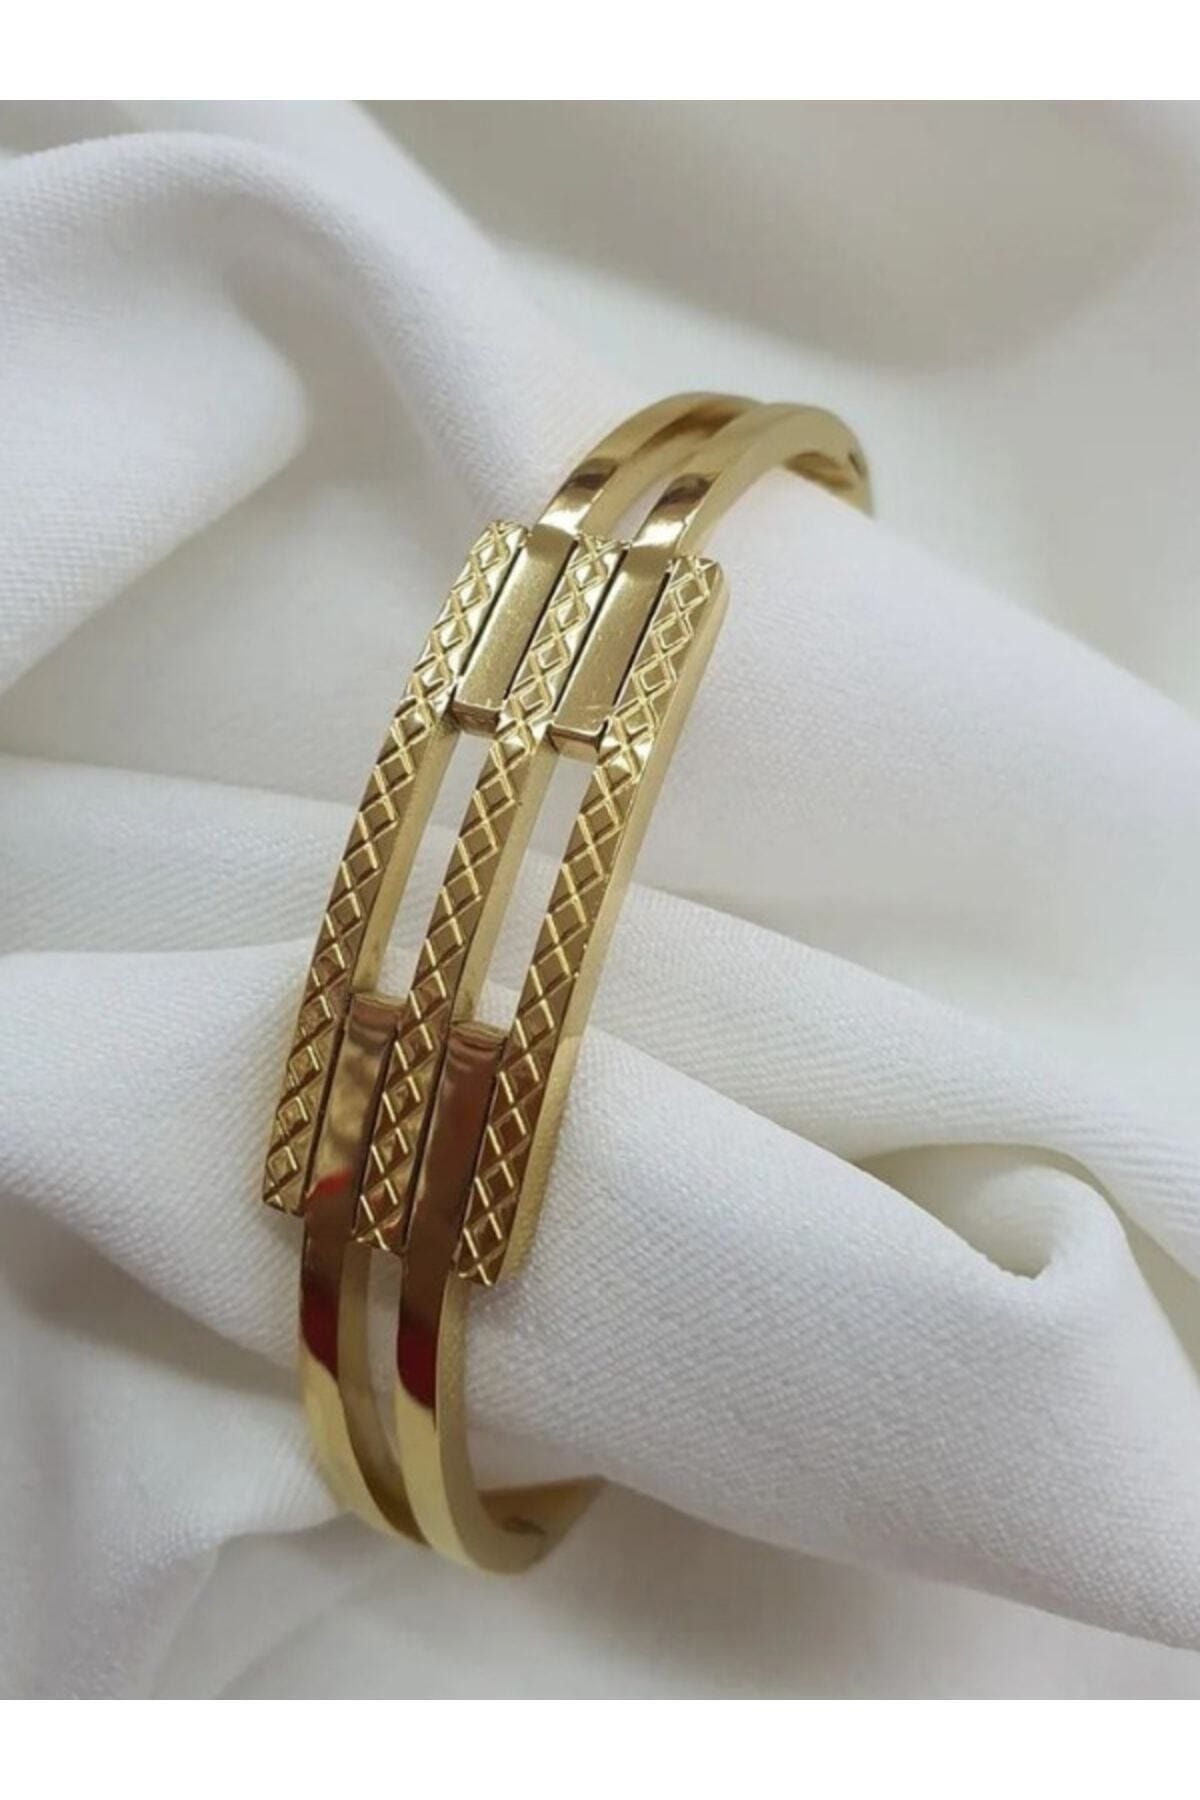 Elegant 14K Gold Indian Couple Bangle Bracelet With Locket New Model Snap  Clasp Jewelry From Cecmic, $3.05 | DHgate.Com